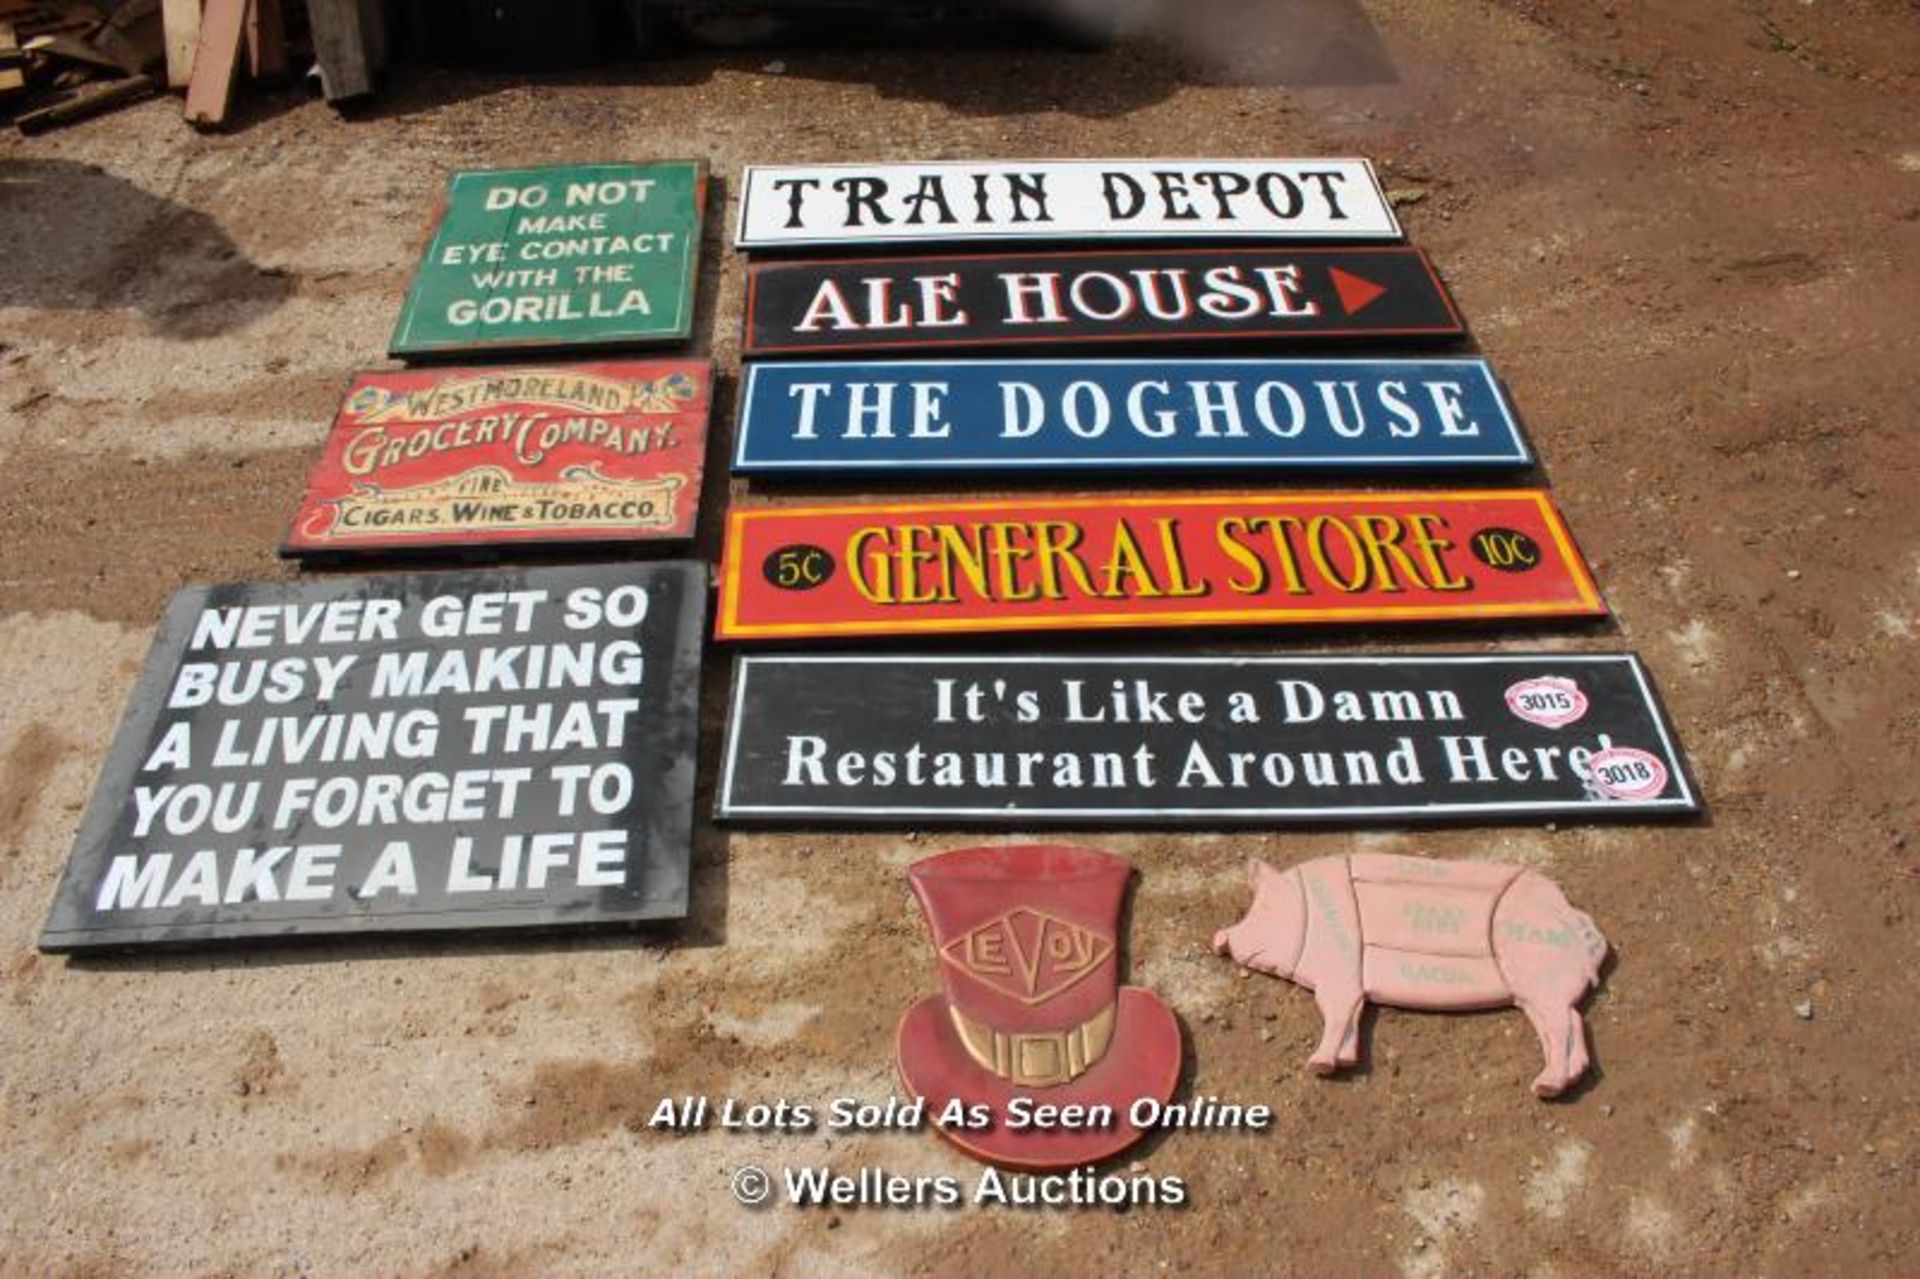 *TEN VARIOUS WOODEN SIGNS INCLUDING 'DO NOT MAKE EYE CONTACT WITH THE GORILLA'